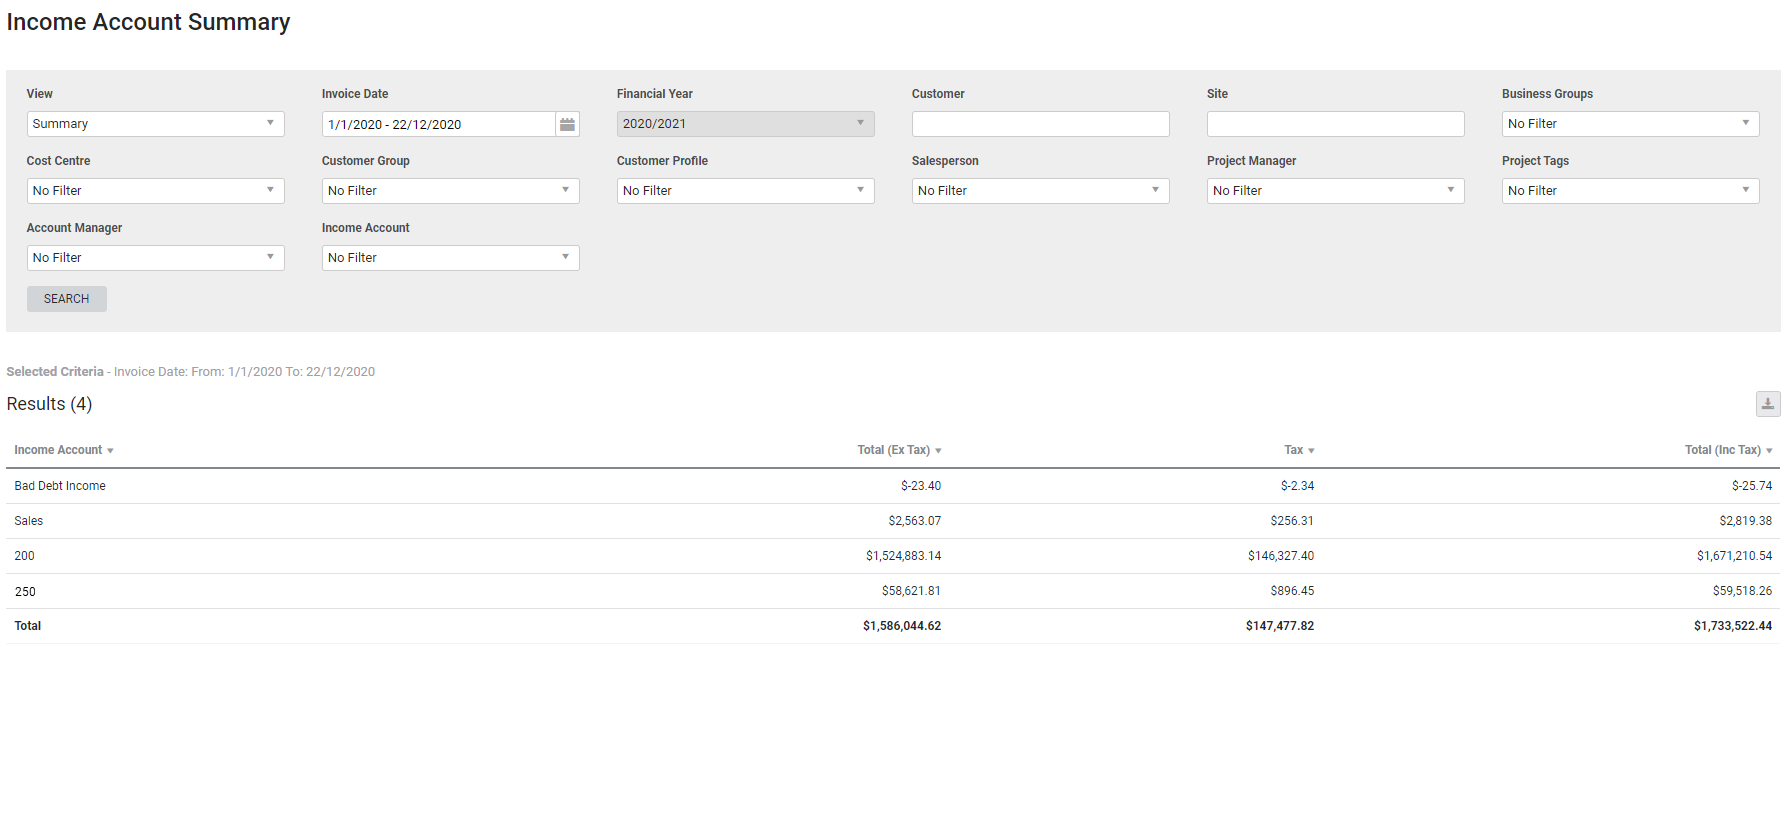 A screenshot of the Income Account Summary report.